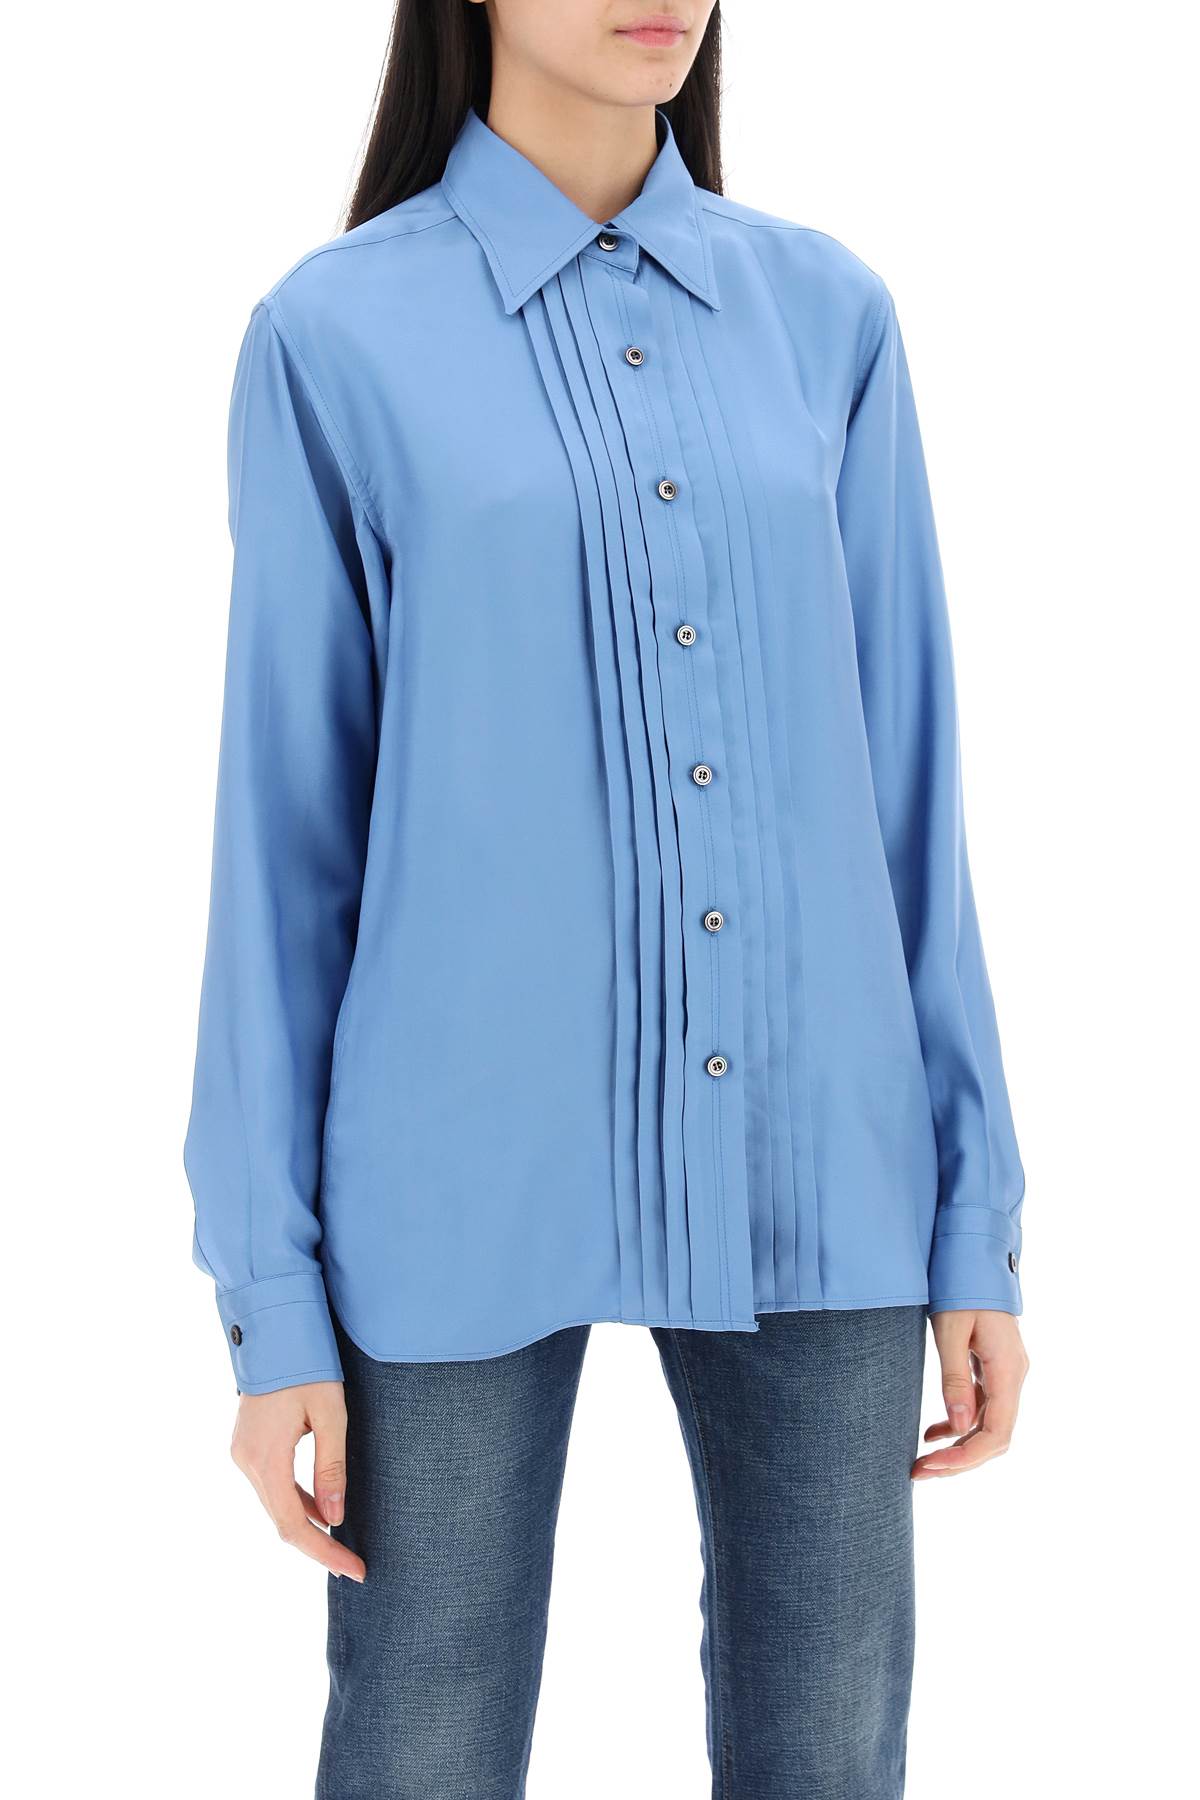 Tom ford pleated bib shirt with-1